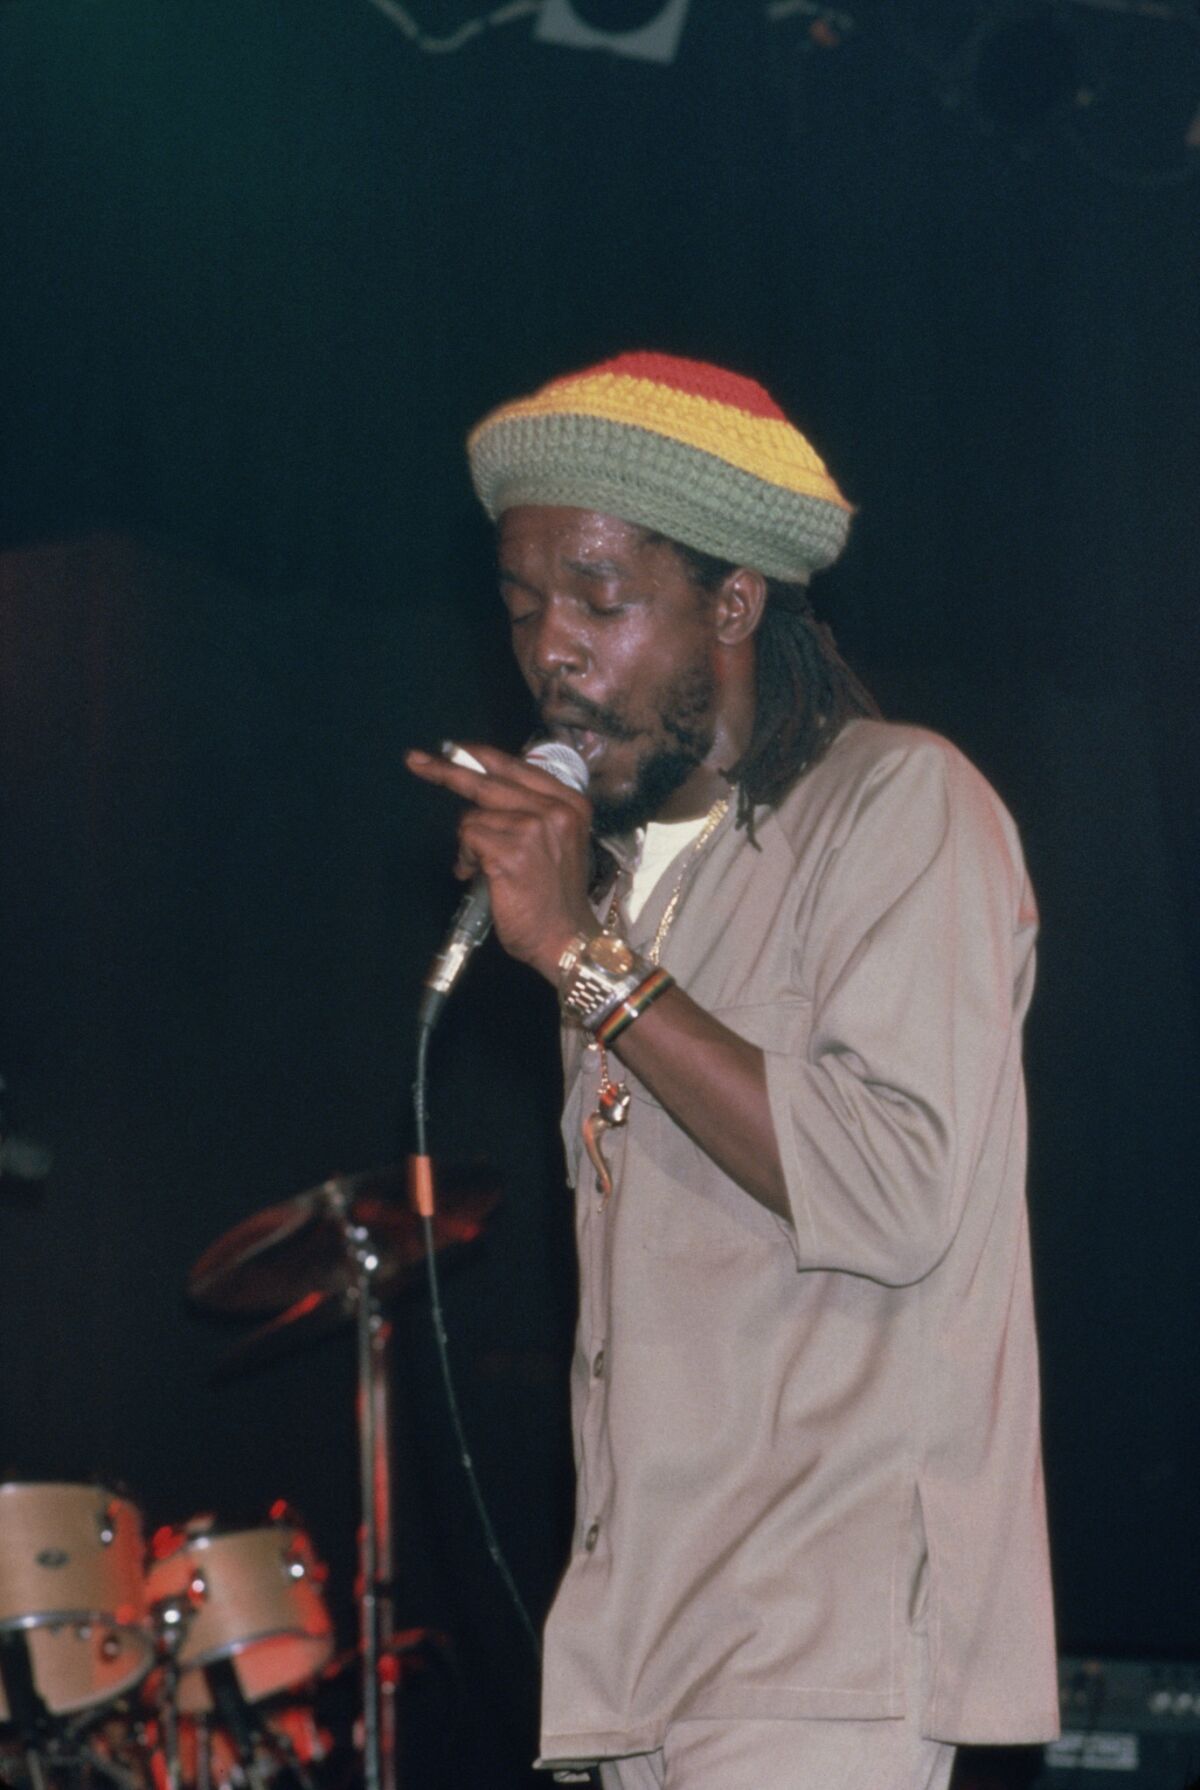 Peter Tosh (1944-1987), Jamaican reggae musician and singer, was a member of the band The Wailers between 1963 and 1974 before enjoying a successful solo career.